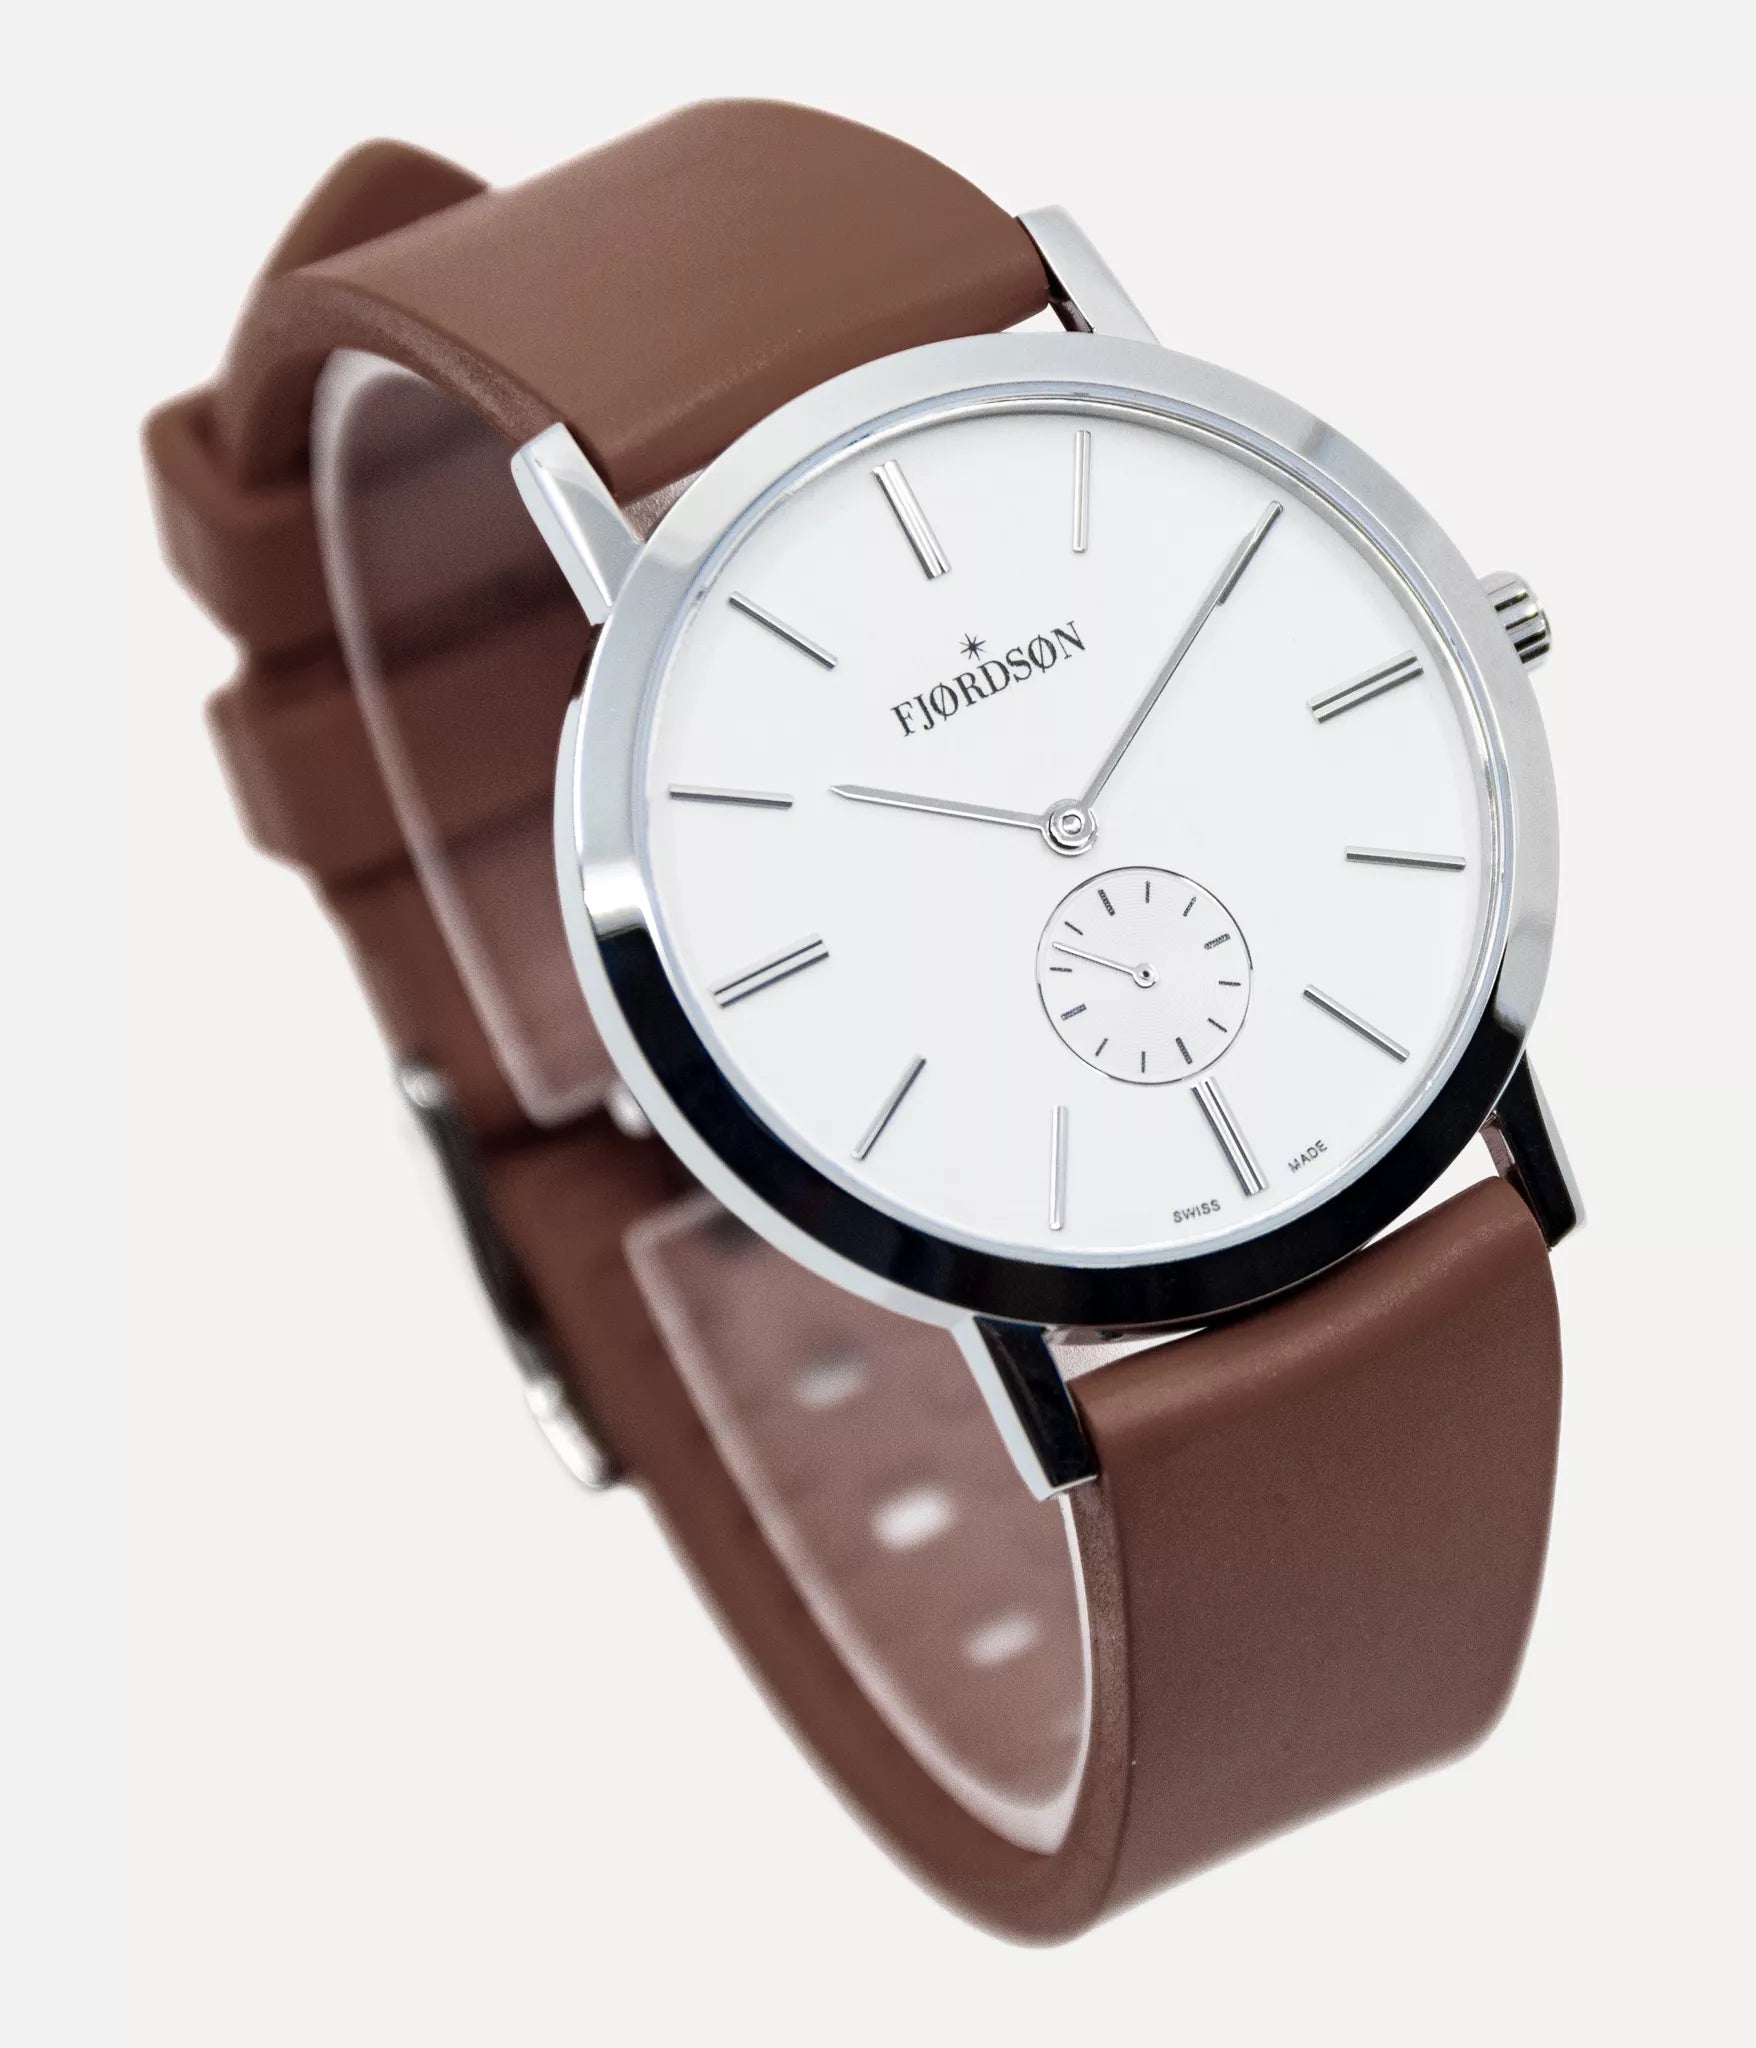 Side shot - Fjordson watch with white dial and brown rubber watch strap - UNISEX - vegan & approved by PETA - Swiss made